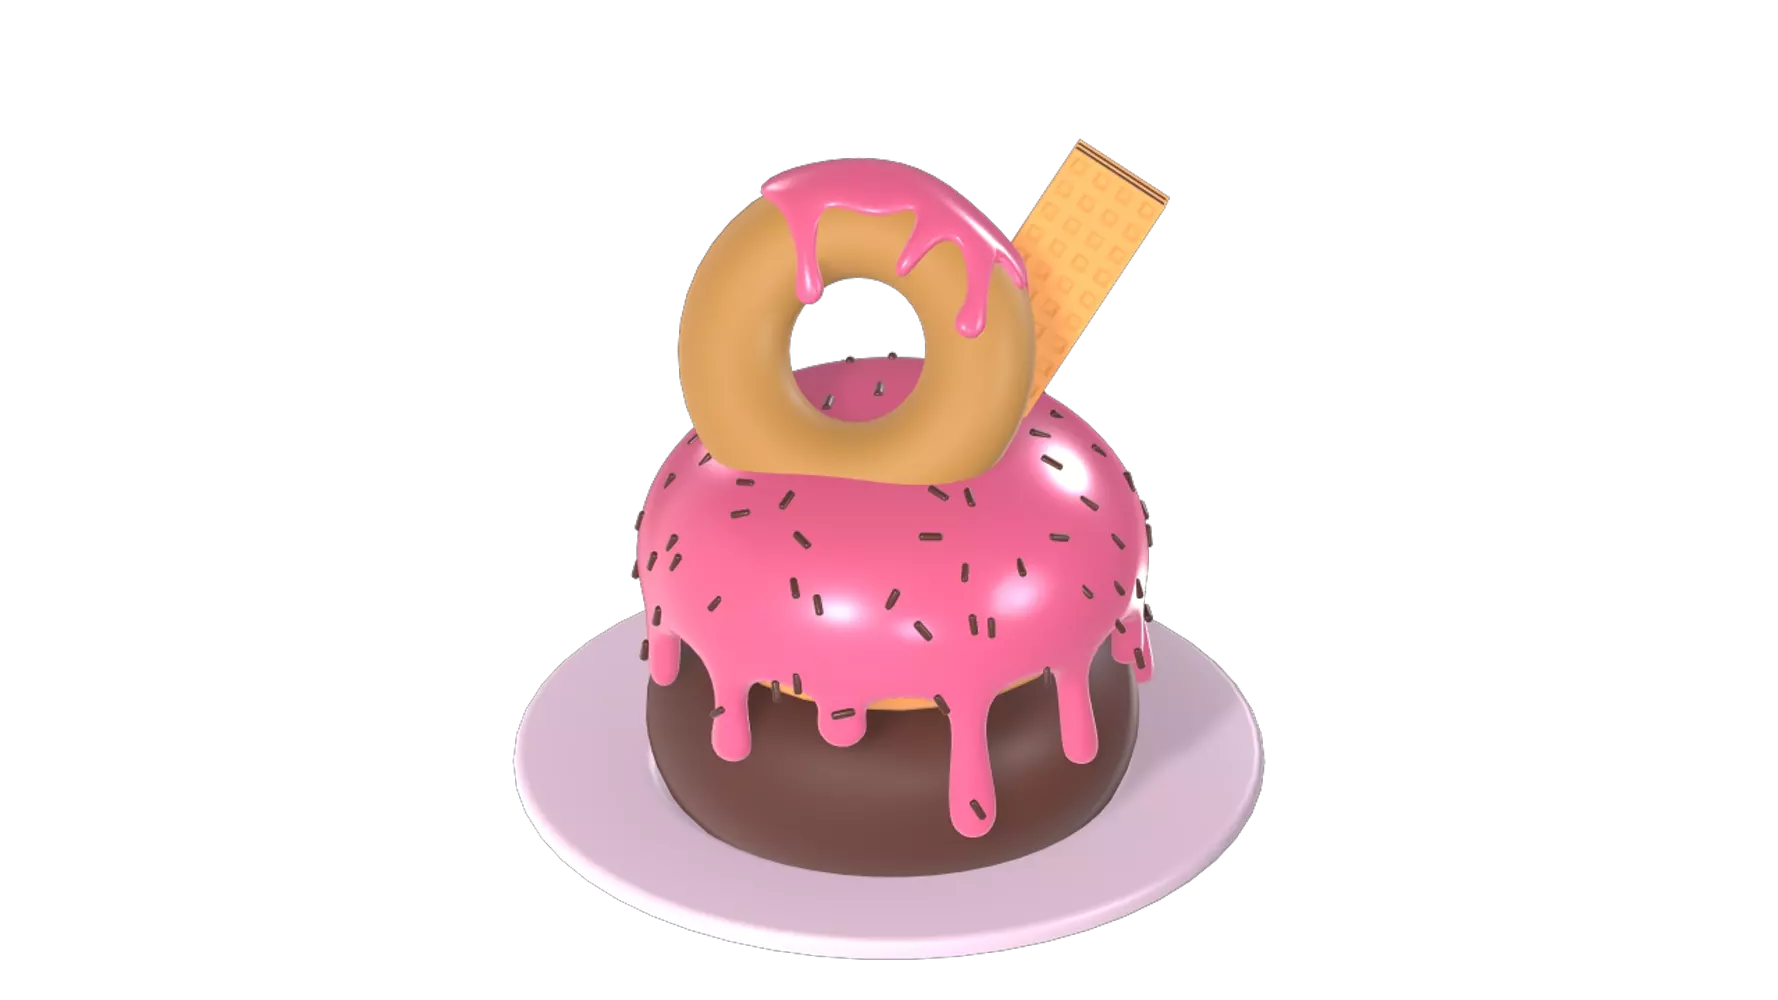 Birthday Cake with Donuts 3D Graphic